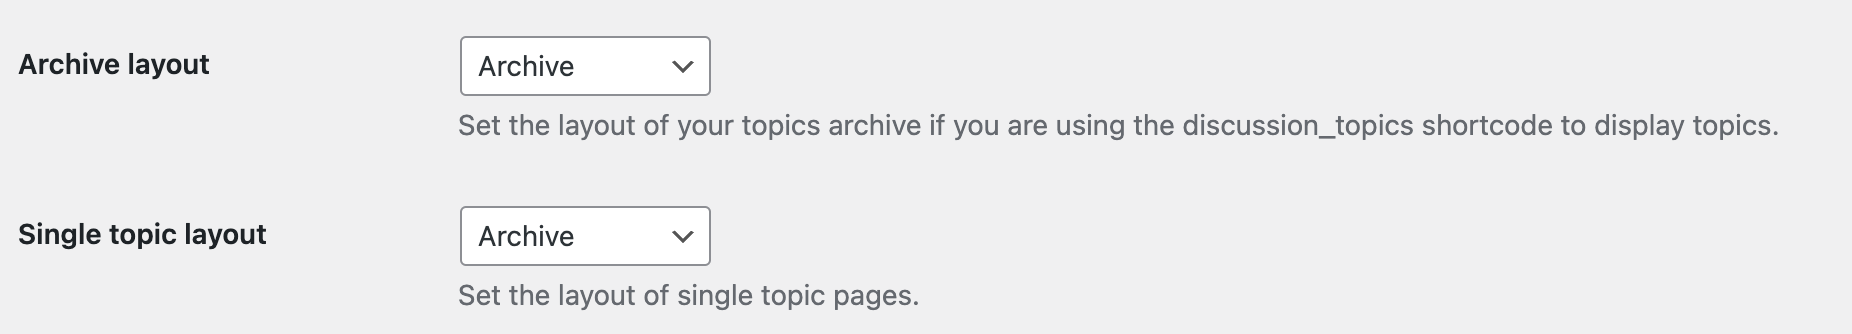 Display categories and tags on archive and single topic layout